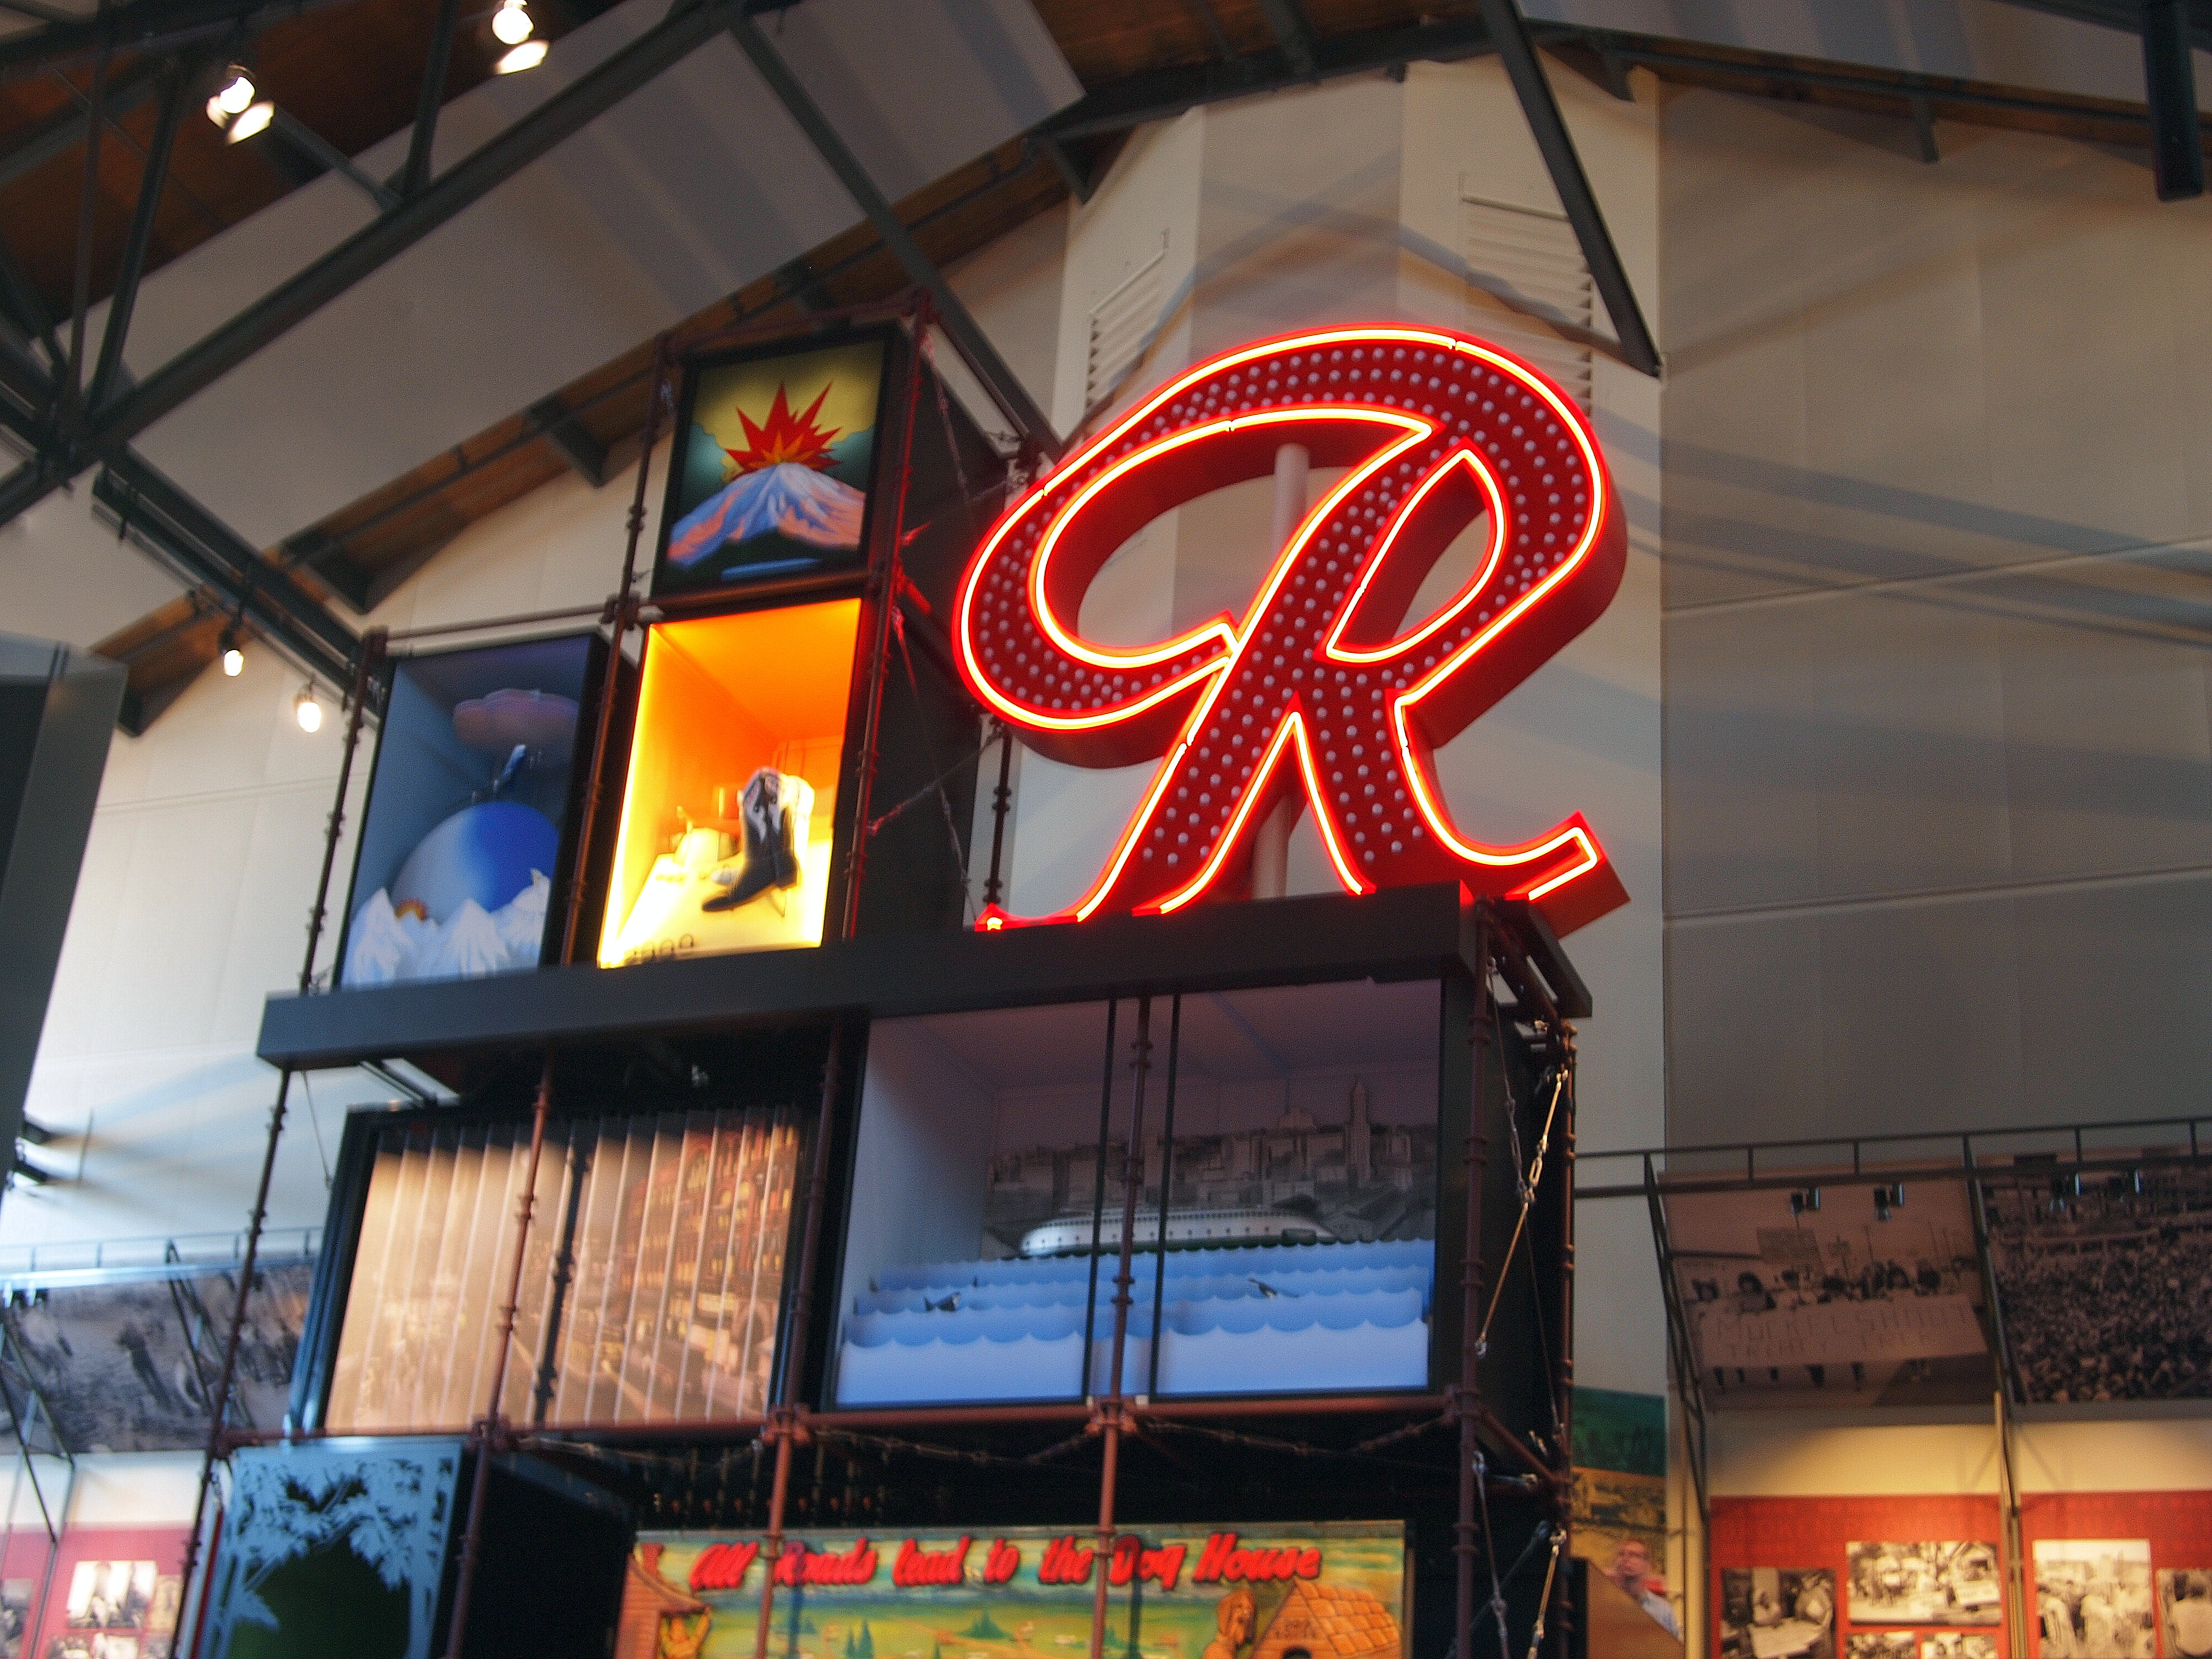 The original R will be staying put in the MOHAI on Lake Union. Flikr/JoeInSouthernCA